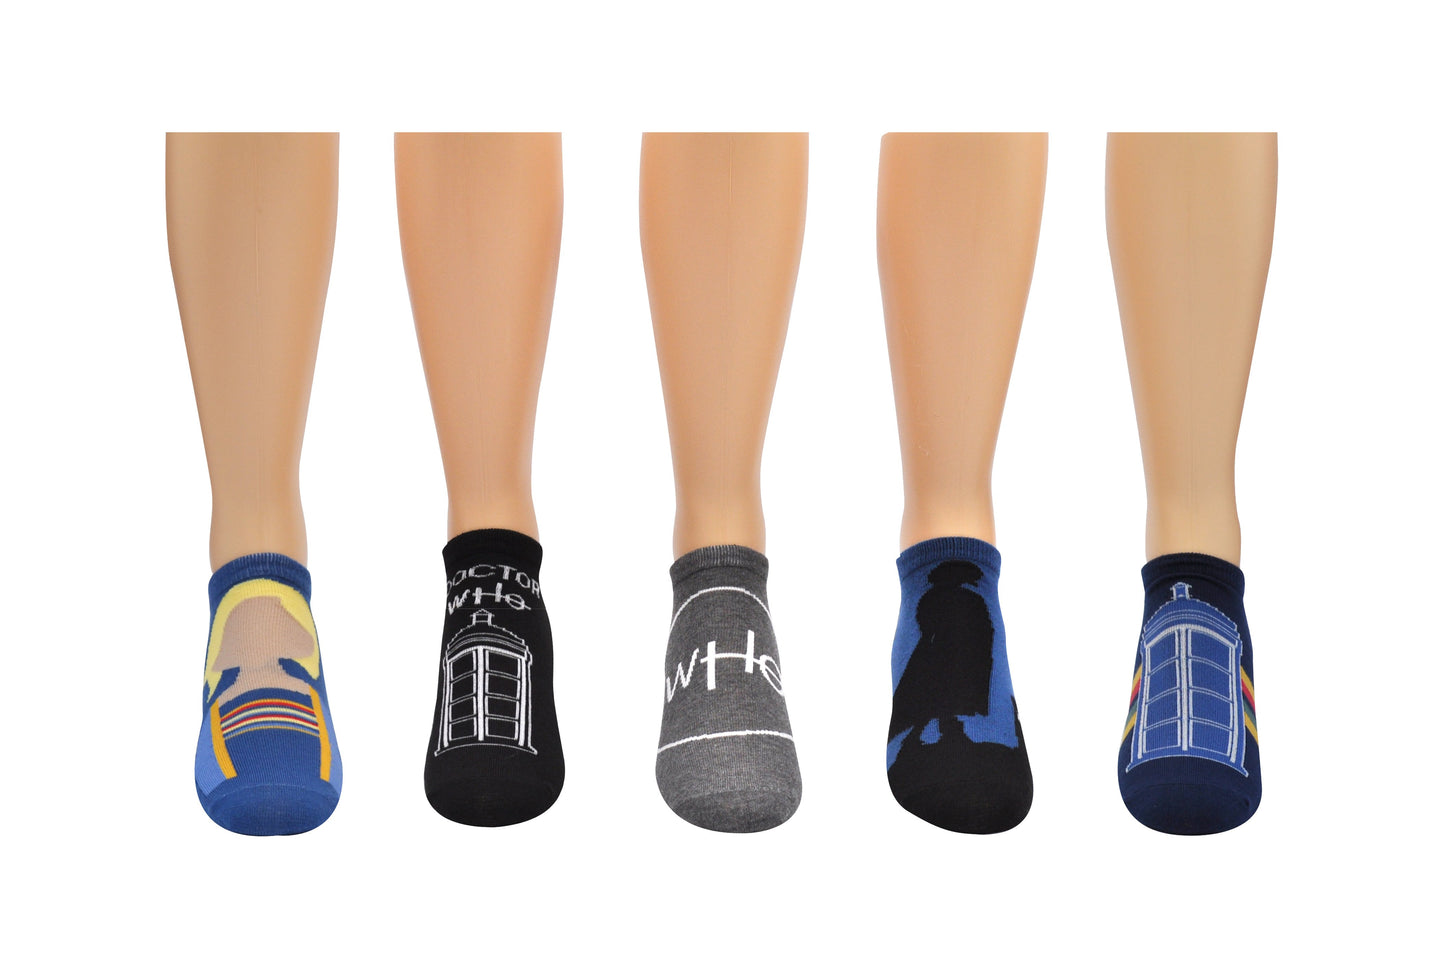 13th Doctor Doctor Who Ankle Socks 5 Pack